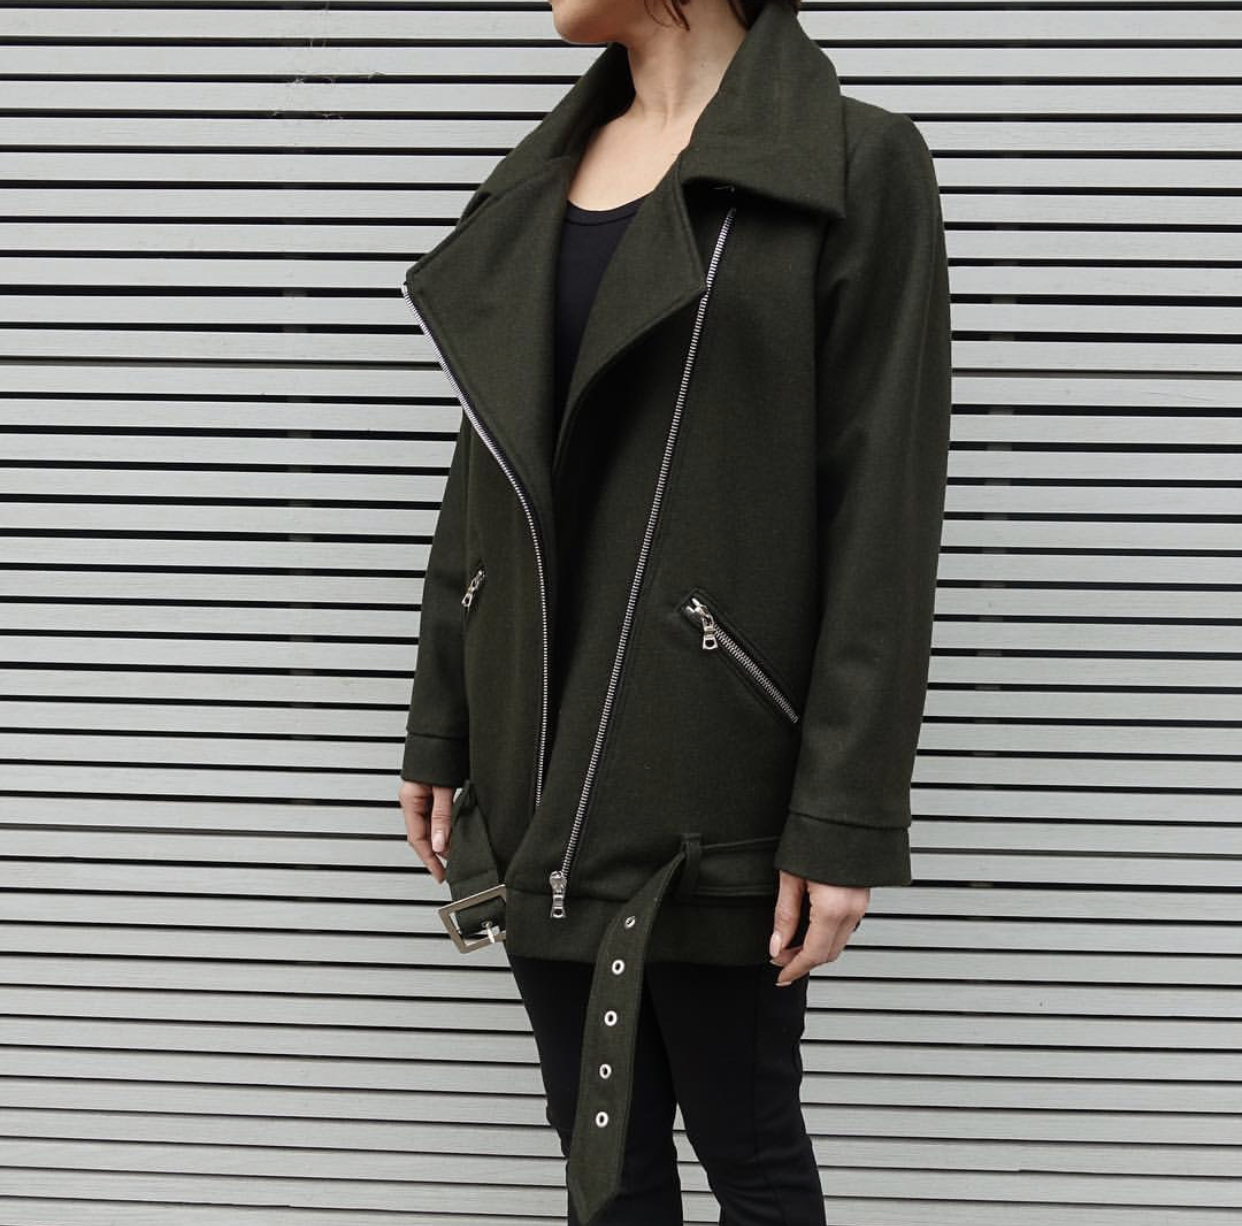 Carly Aviator Jacket - PDF Jacket Sale On Now! Sale runs from 23-28 September. Coupon Code: 20JKTOFF